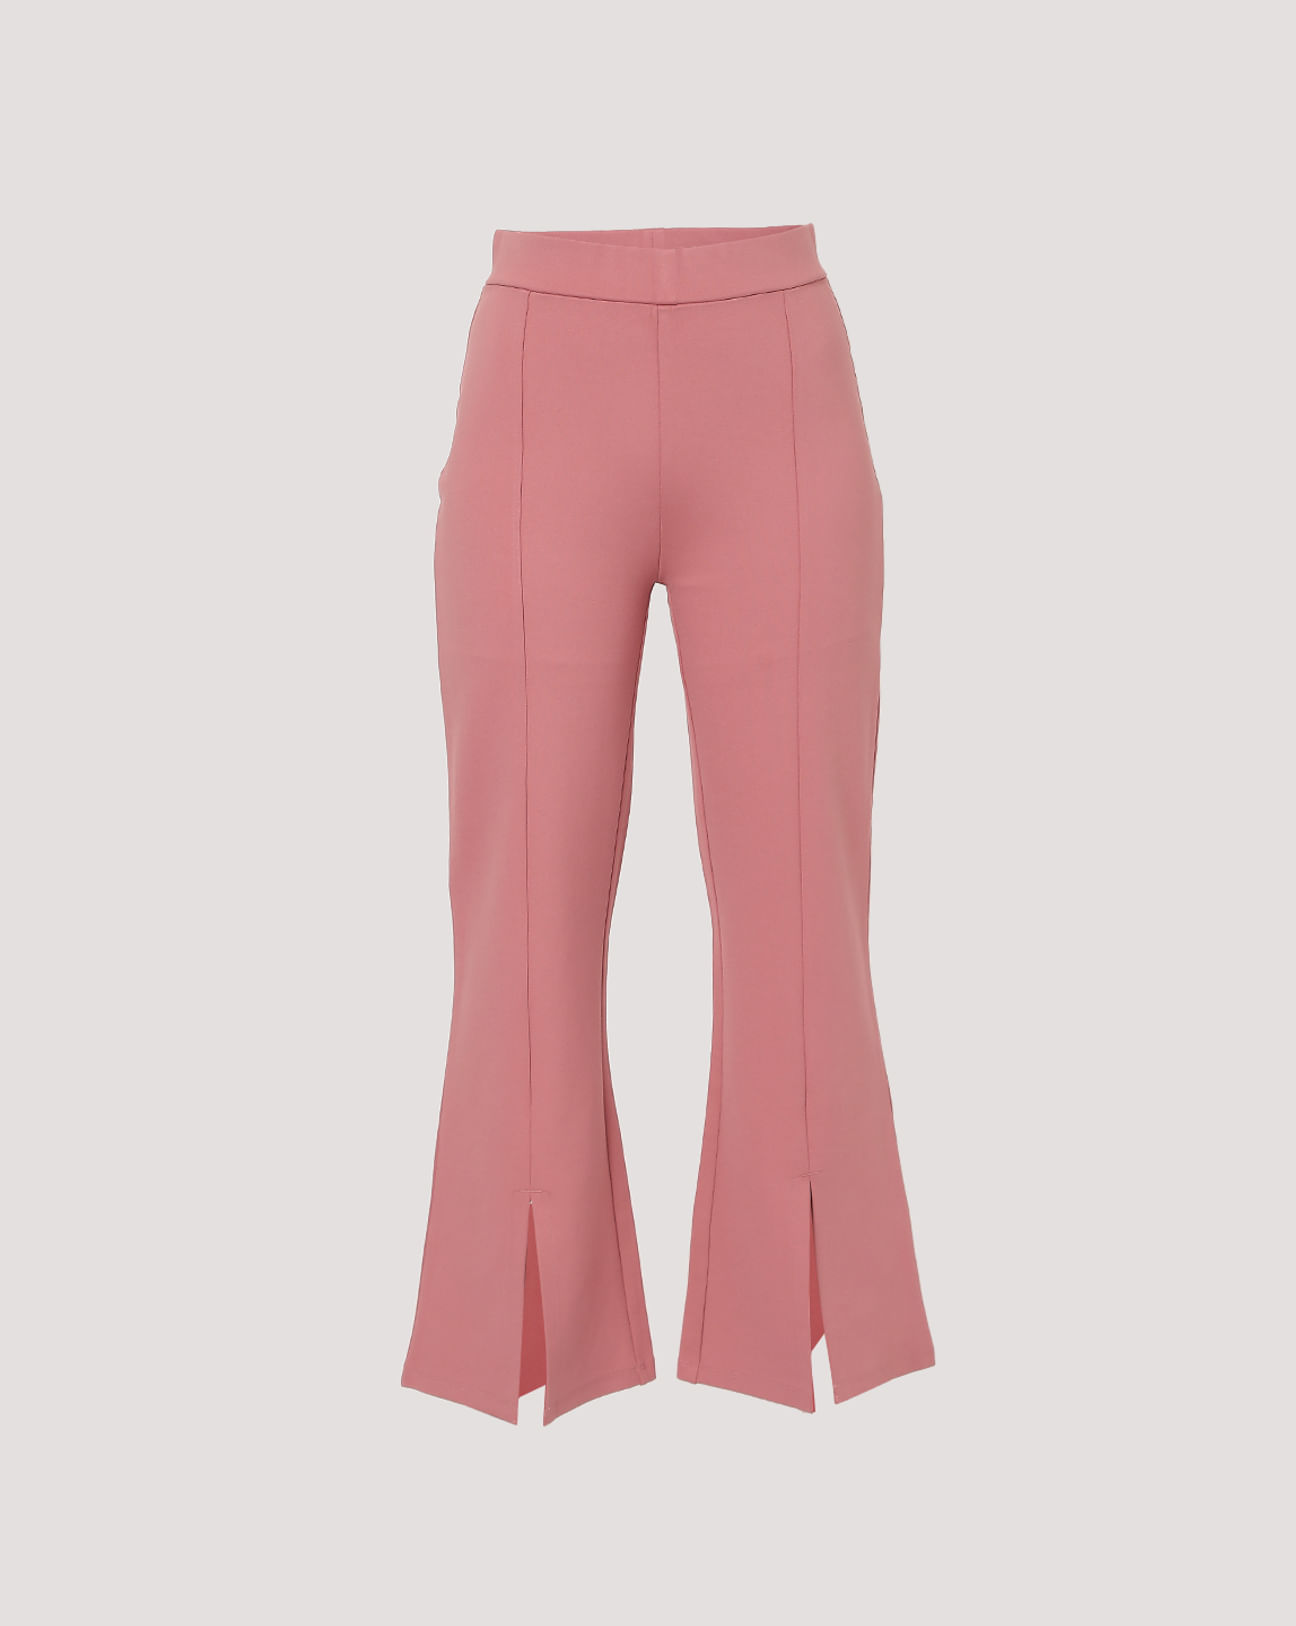 Buy Pink Rise Bootcut Online India.